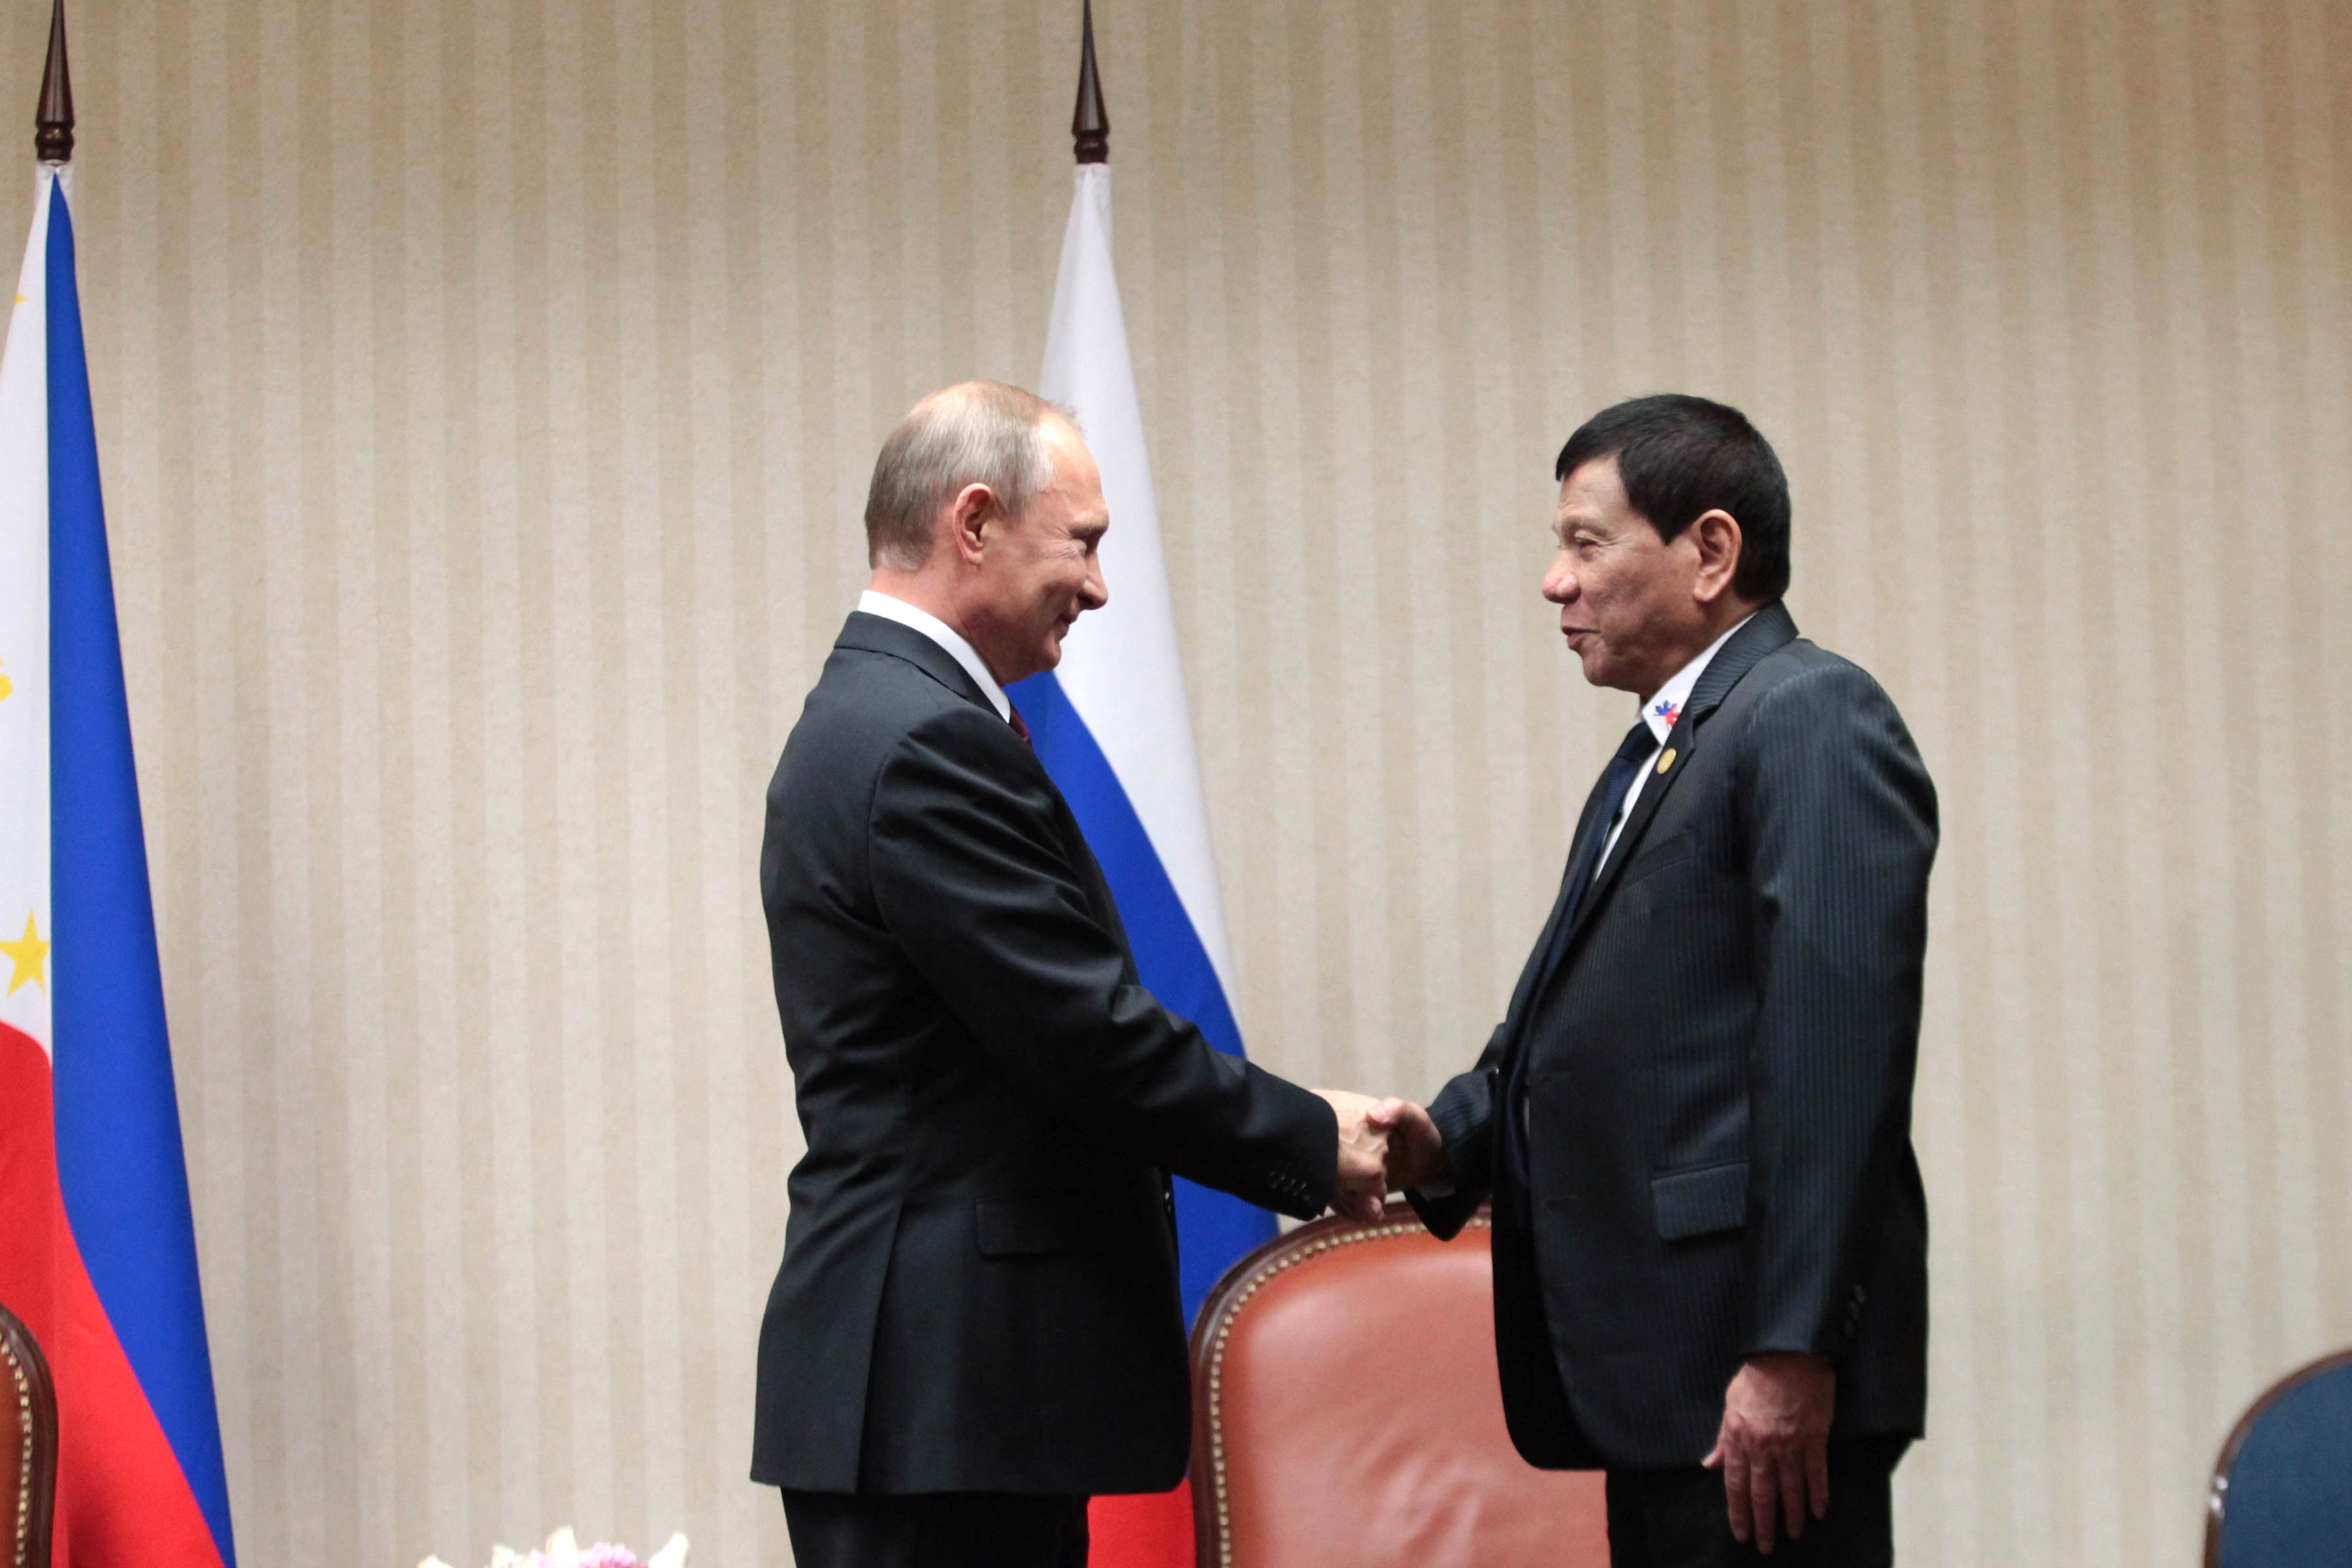 MEETING PUTIN. President Rodrigo Duterte and Russian President Vladimir Putin shake hands during their bilateral meeting at the sidelines of the Asia-Pacific Economic Cooperation (APEC) Leaders' Summit in Lima, Peru on November 19. File photo by Robinson Niñal Jr/Presidential Photo
